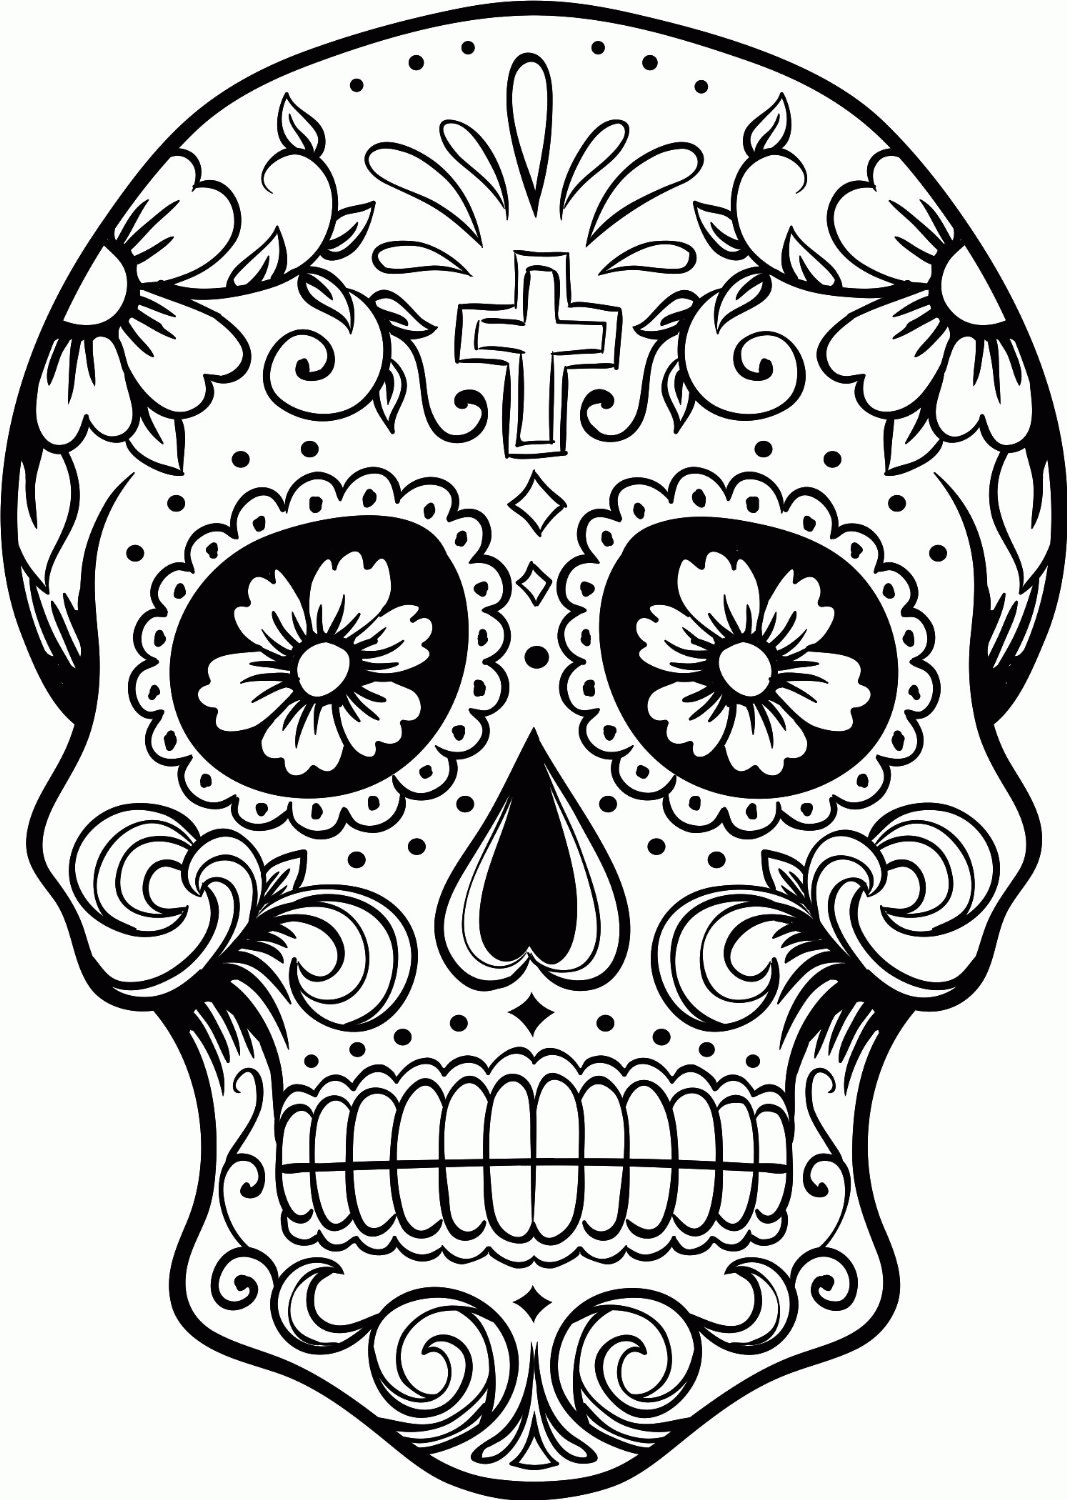 Candy Skulls Coloring Pages - High Quality Coloring Pages